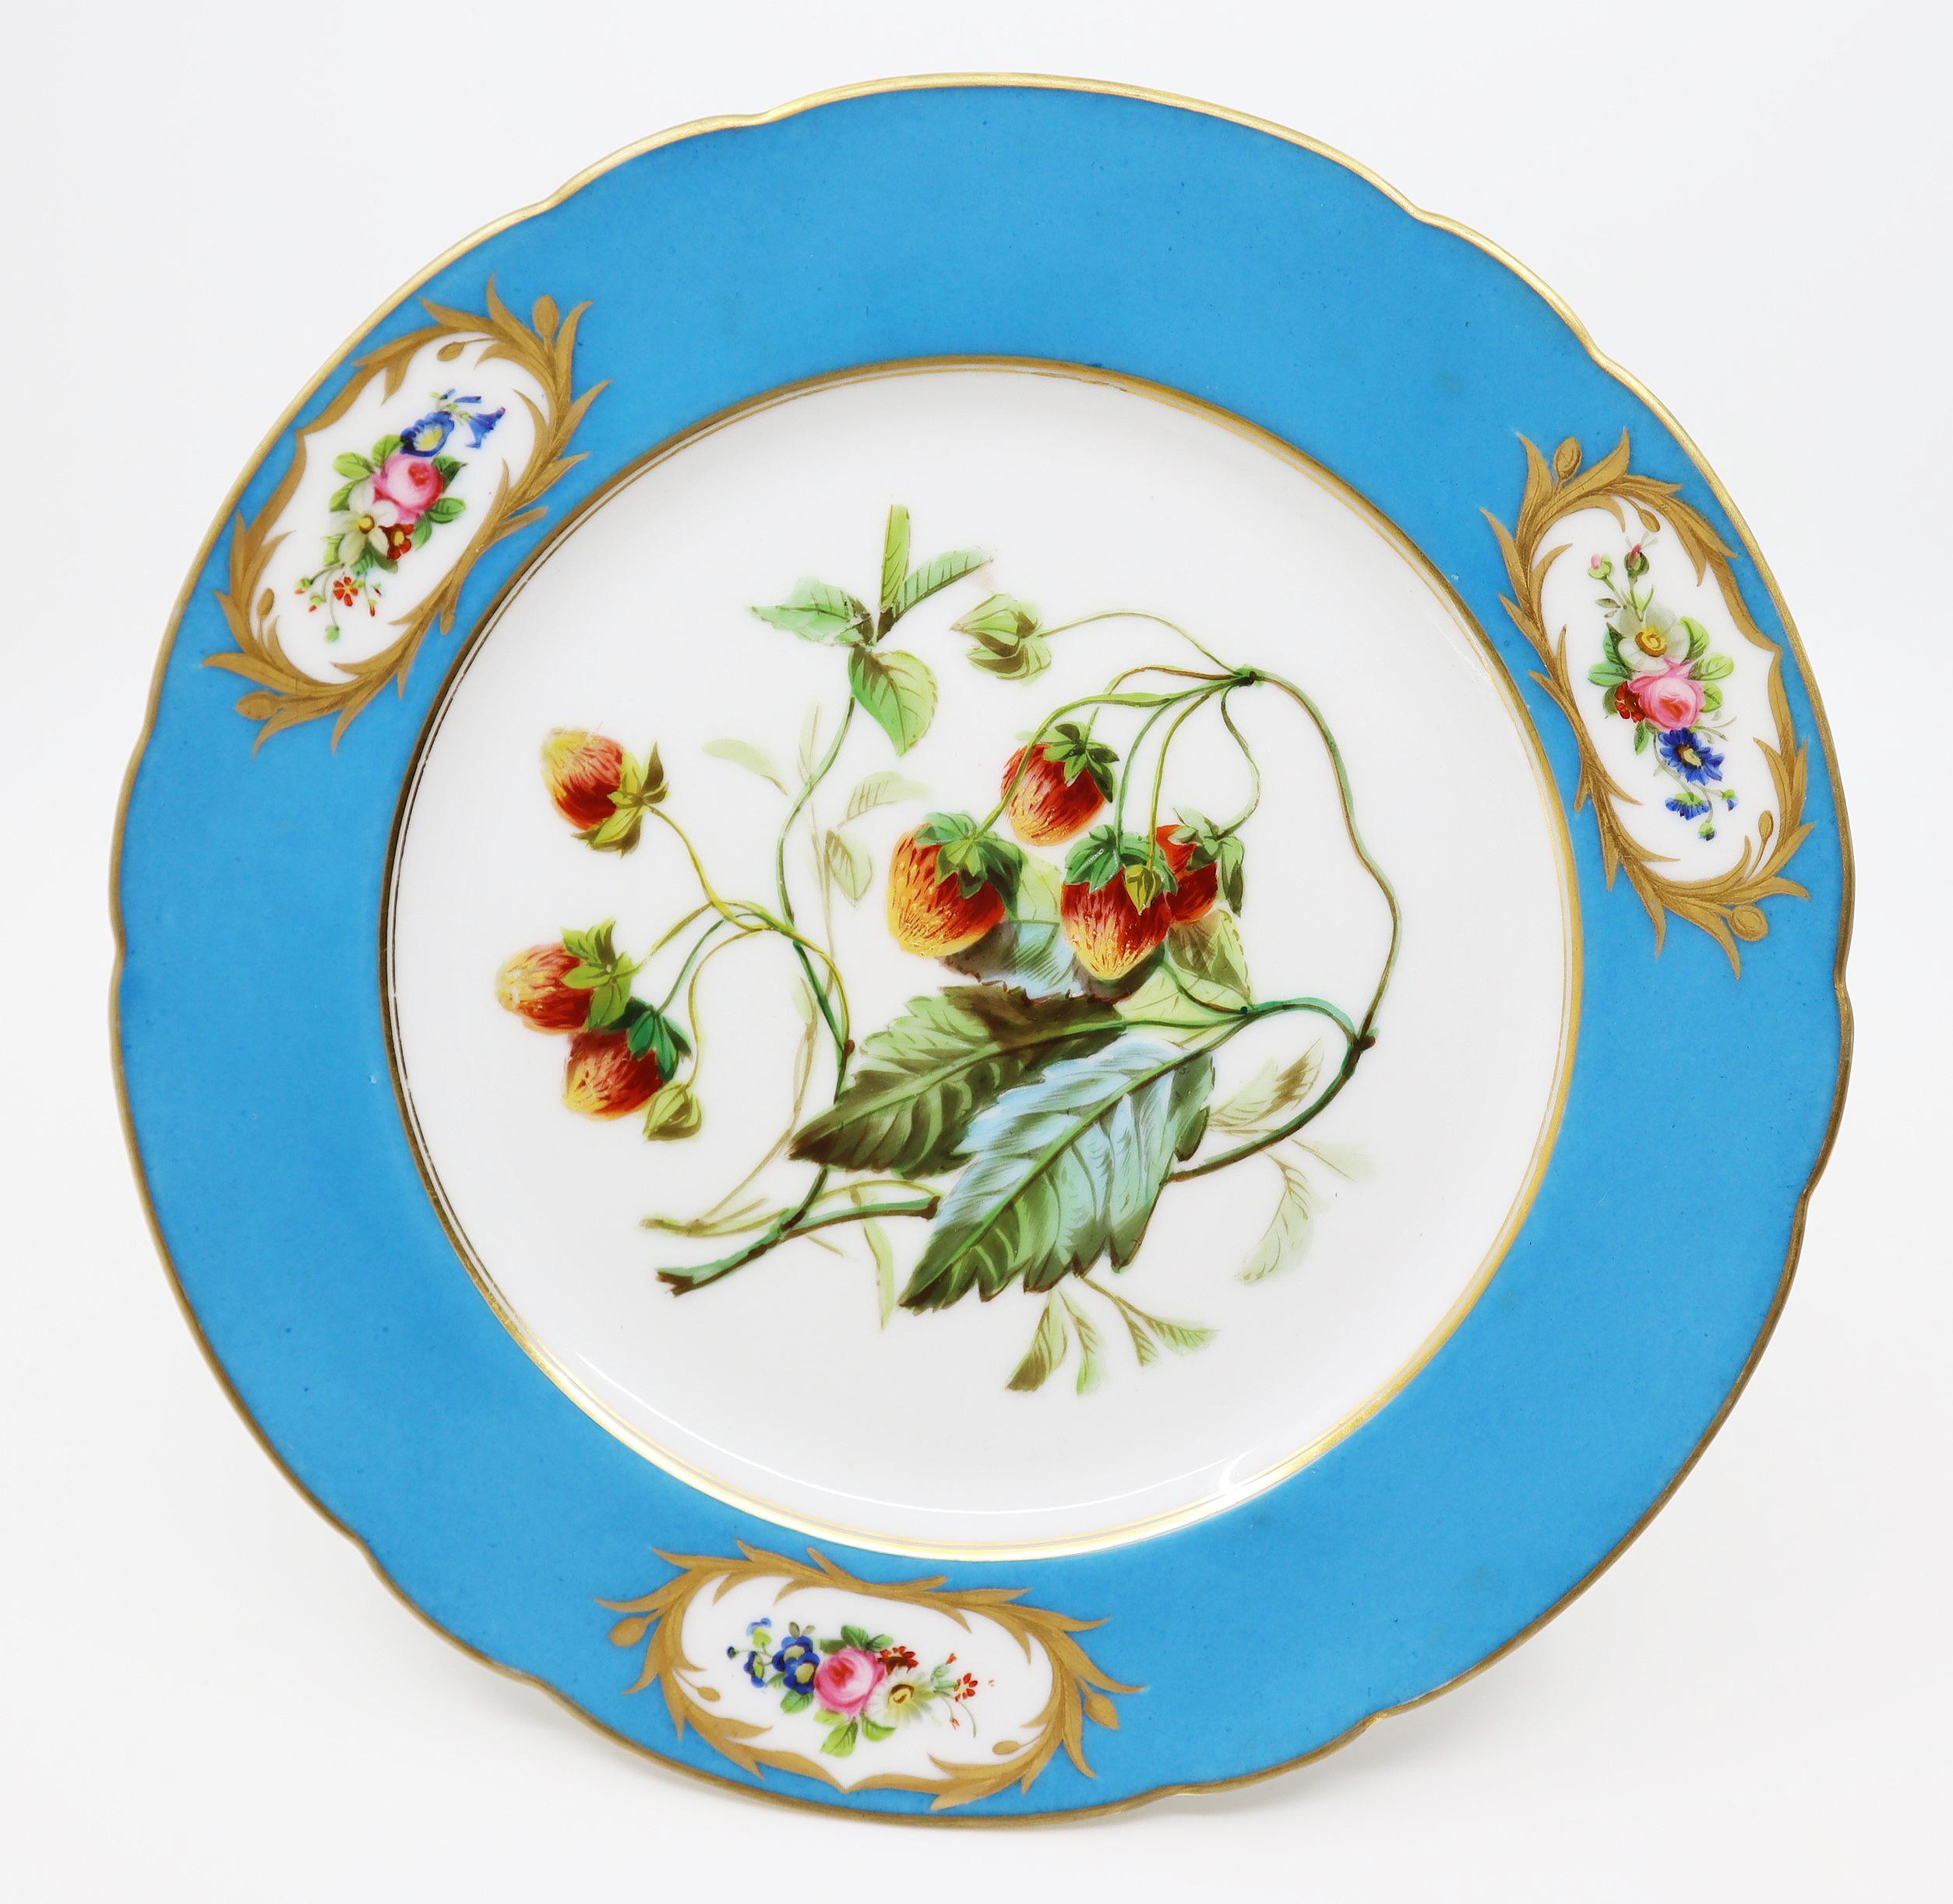 A rare and beautiful 12 dessert plates and one bowl from early 19th century Paris hand painted and gilded porcelain. The plates’ and bowl borders are each painted with three cartouches of variant fruits bouquets in the Sèvres style; the center of